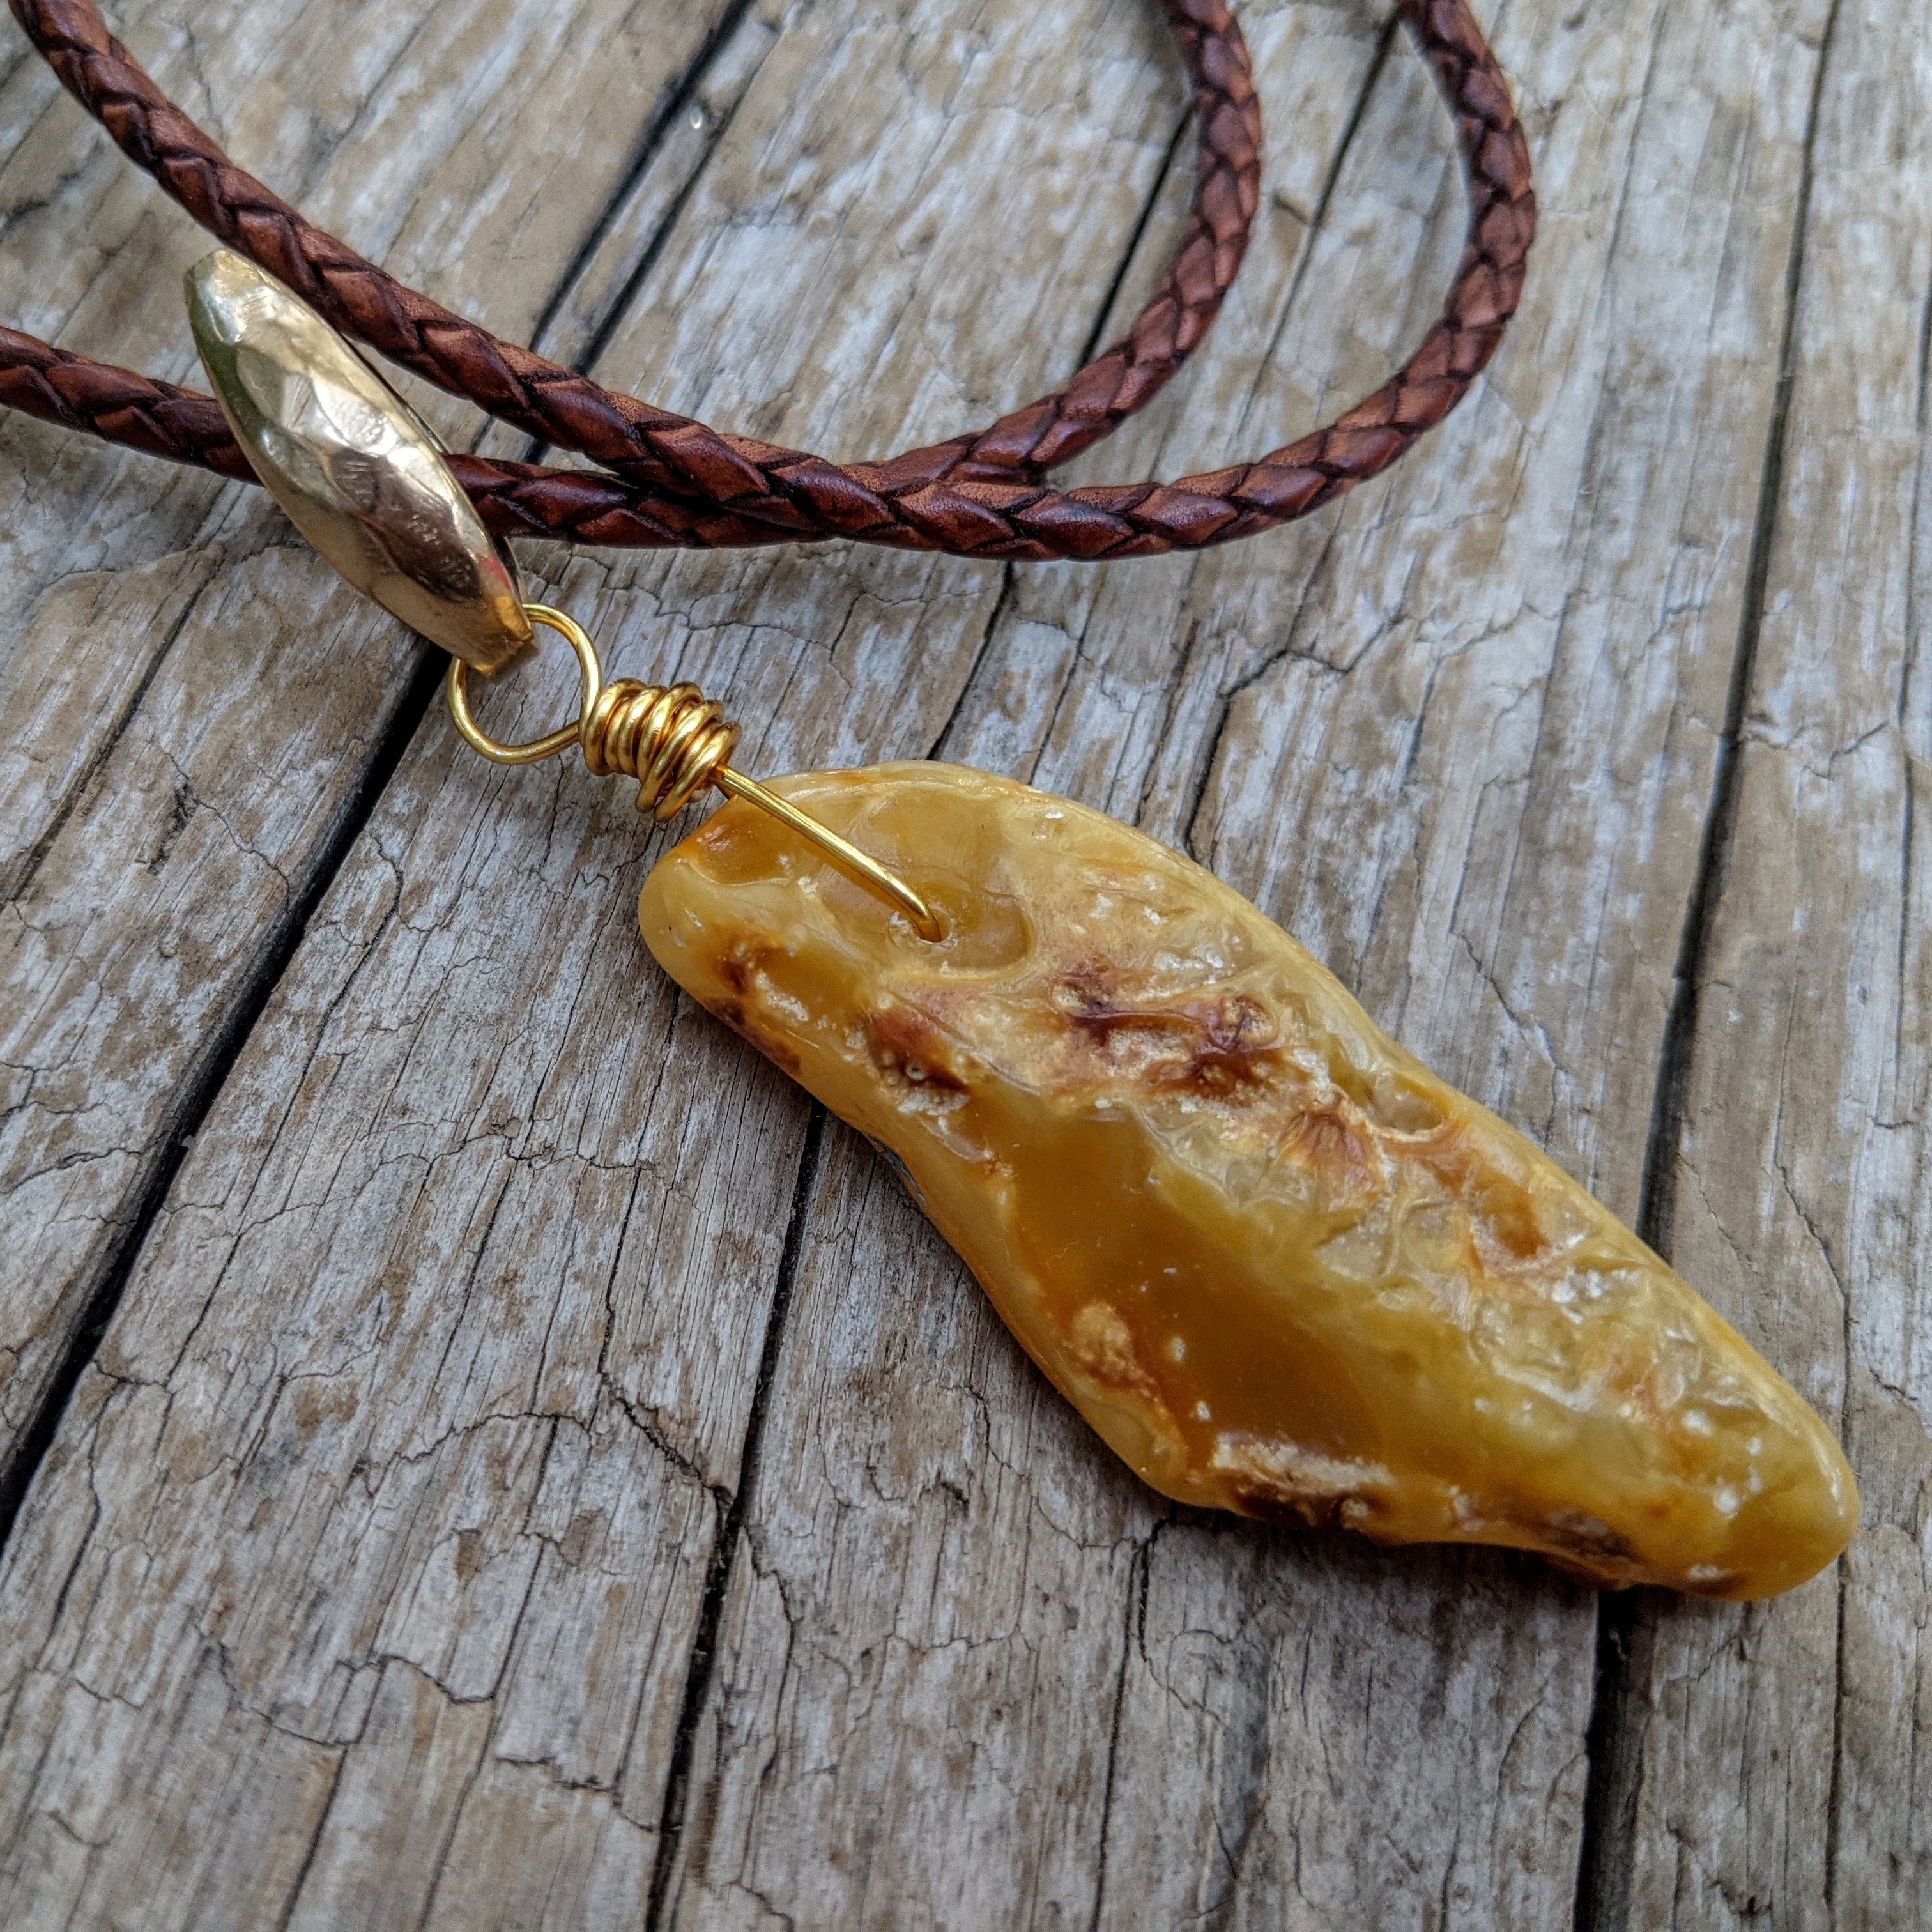 Butterscotch Baltic amber pendant necklace. Rustic amber pendant. Amber leather necklace. Handcrafted by Aurora Creative Jewellery.